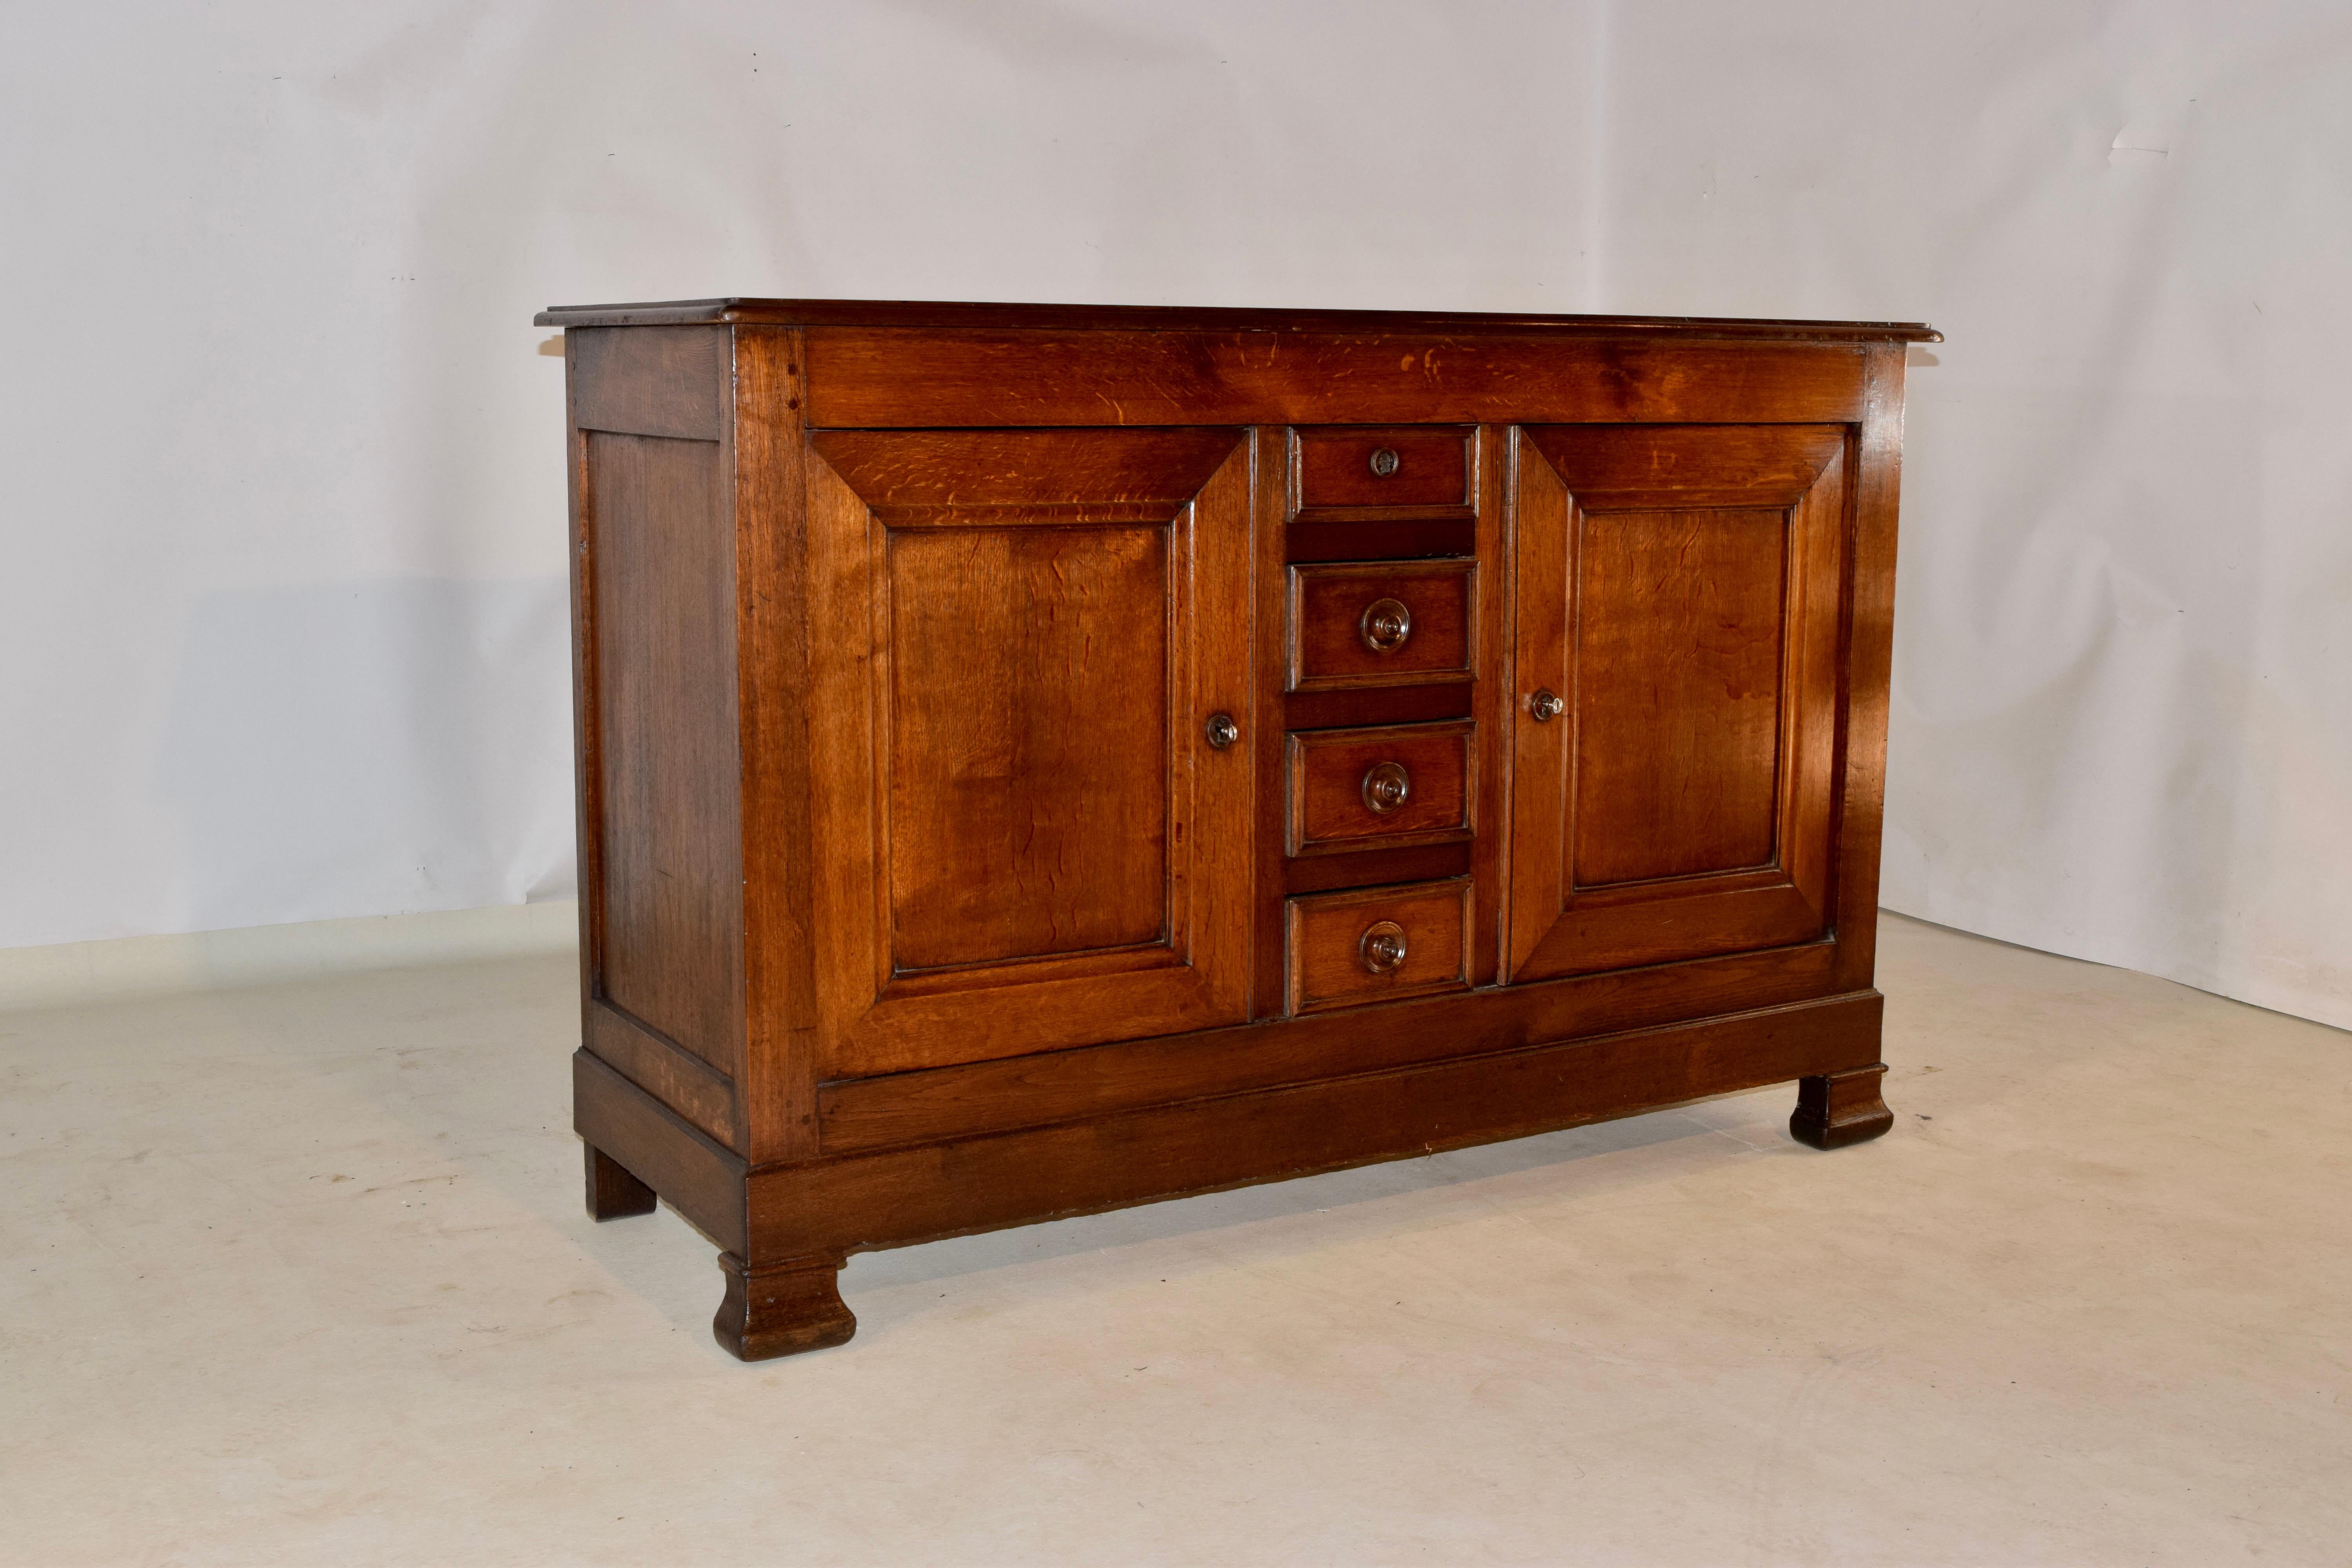 19th century oak buffet from France with a banded and beveled edge around the top, following down to simple paneled sides and four central drawers, all with molded edges and flanked by two paneled doors. The apron is simple and the piece is